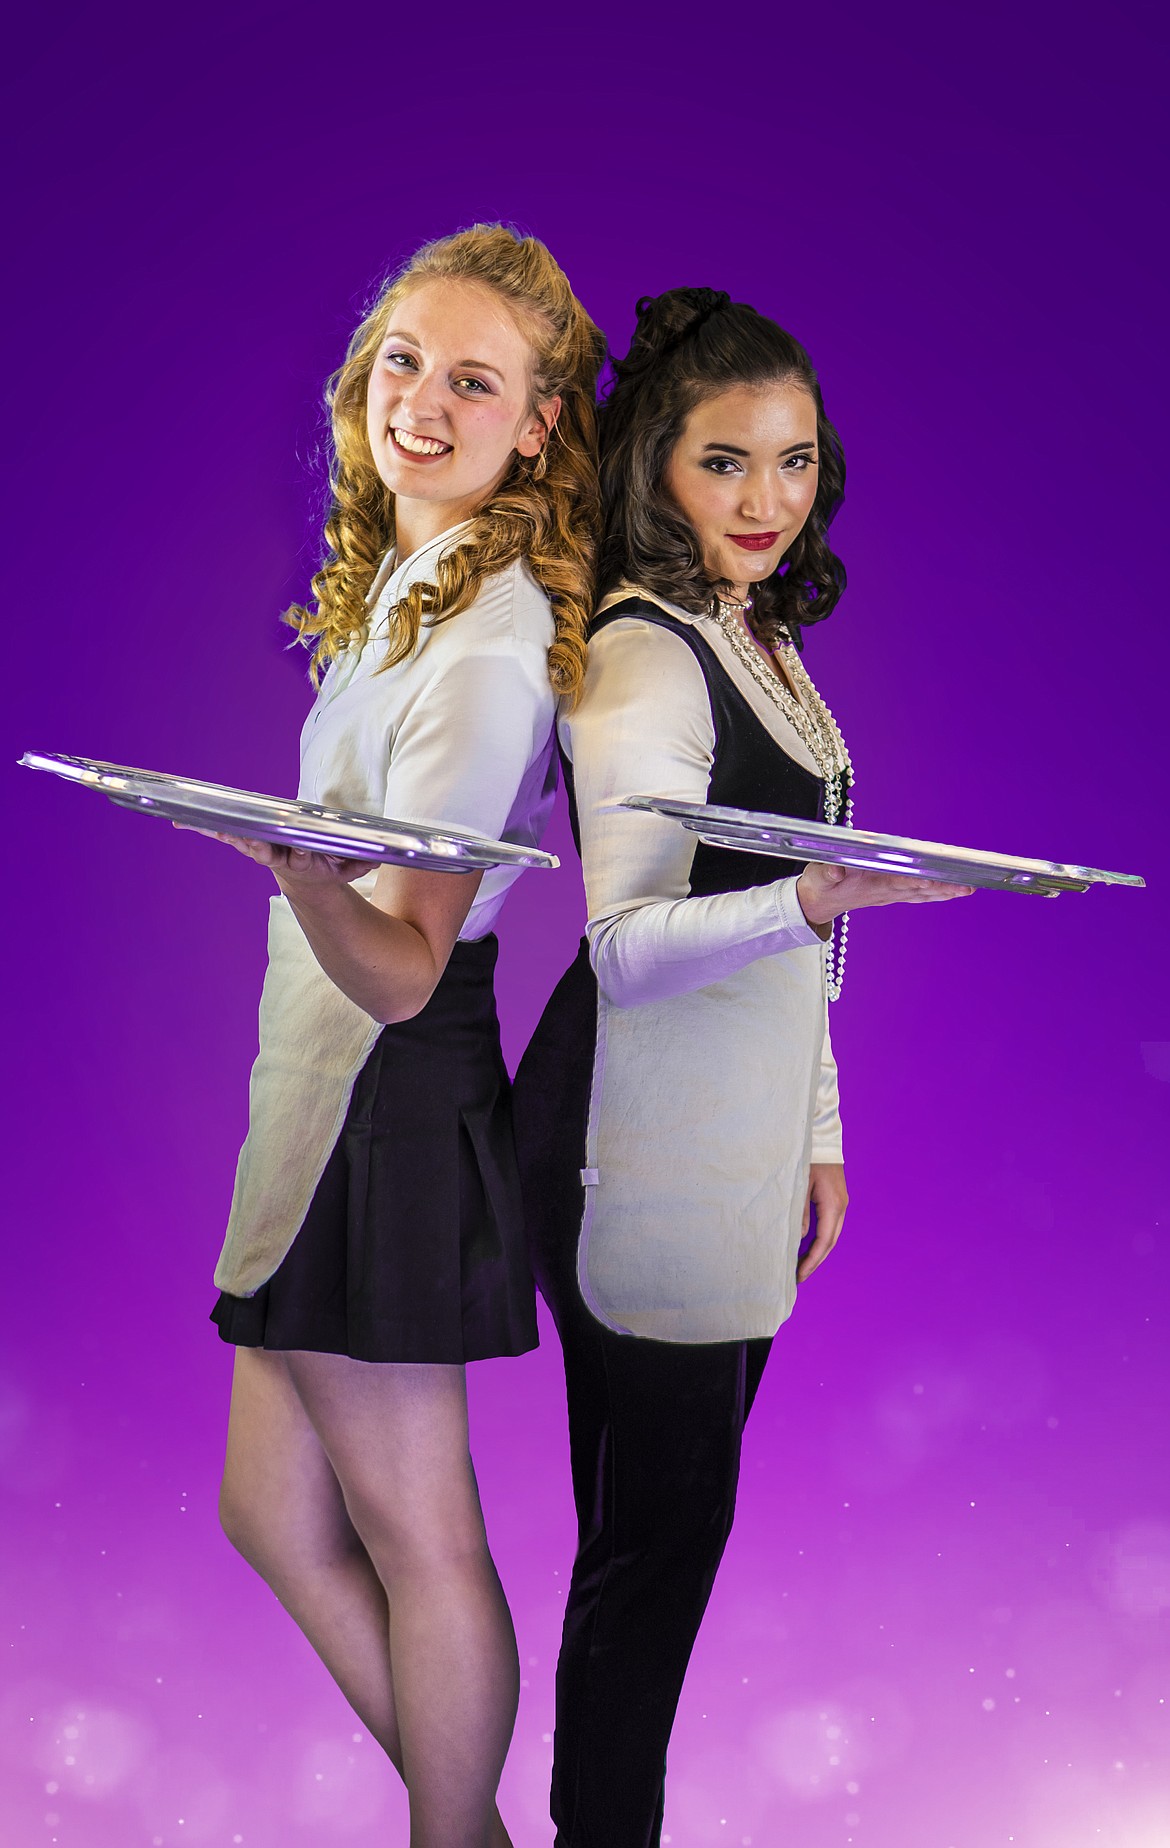 CADEN BUTERA/Courtesy
Marta Myers, left, and Halle Schmitt in &#147;The Wedding Singer&#148; at Lake City Playhouse.